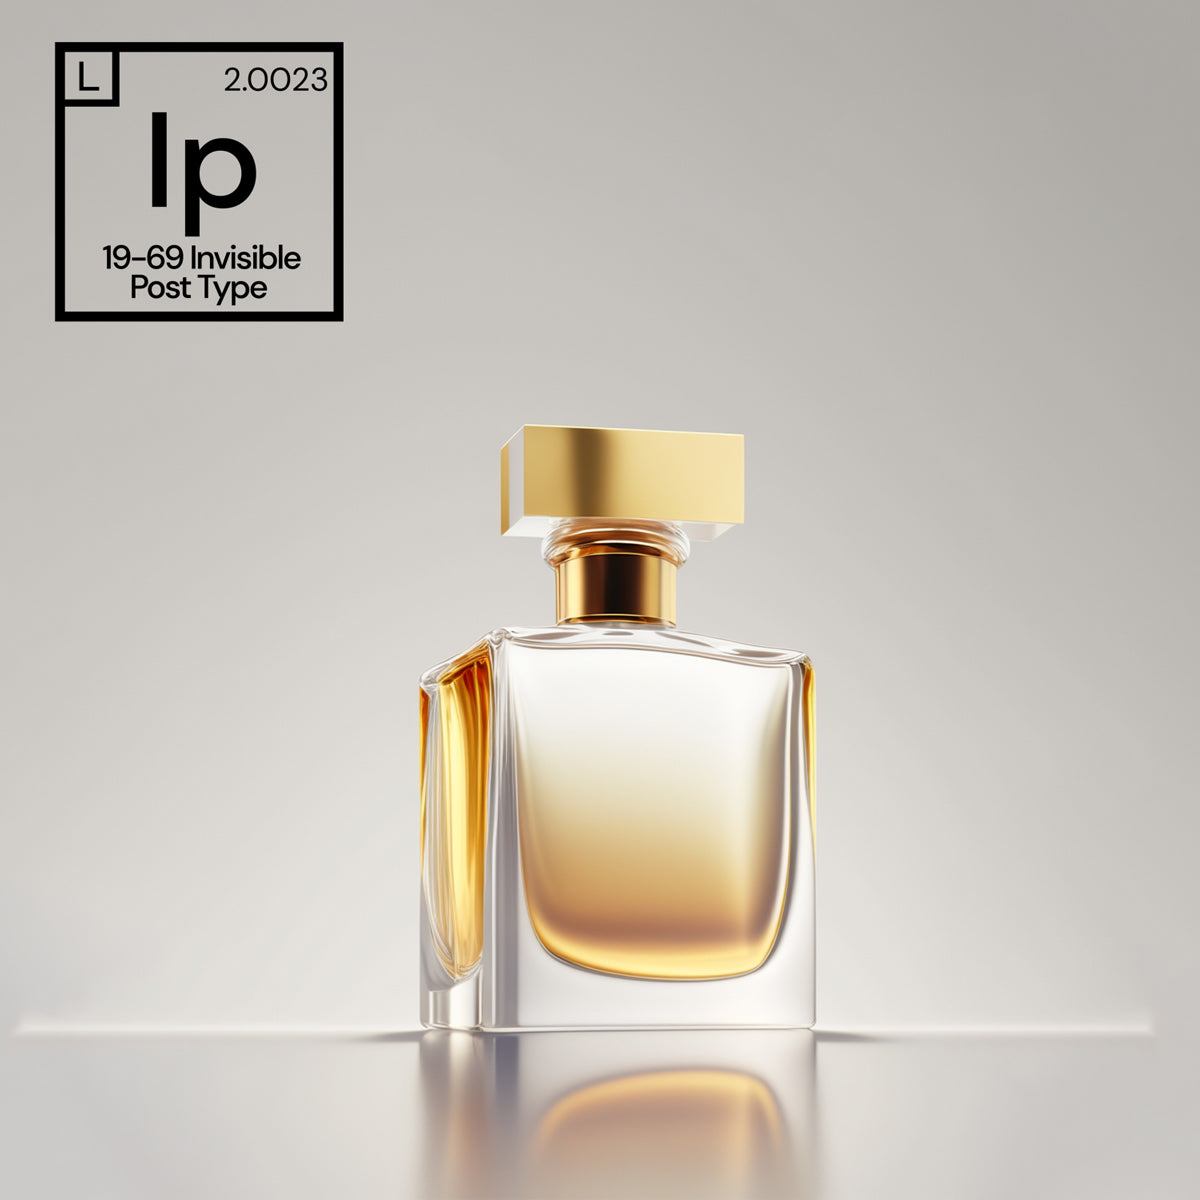 19-69 Invisible Post Type Fragrance #2.0023